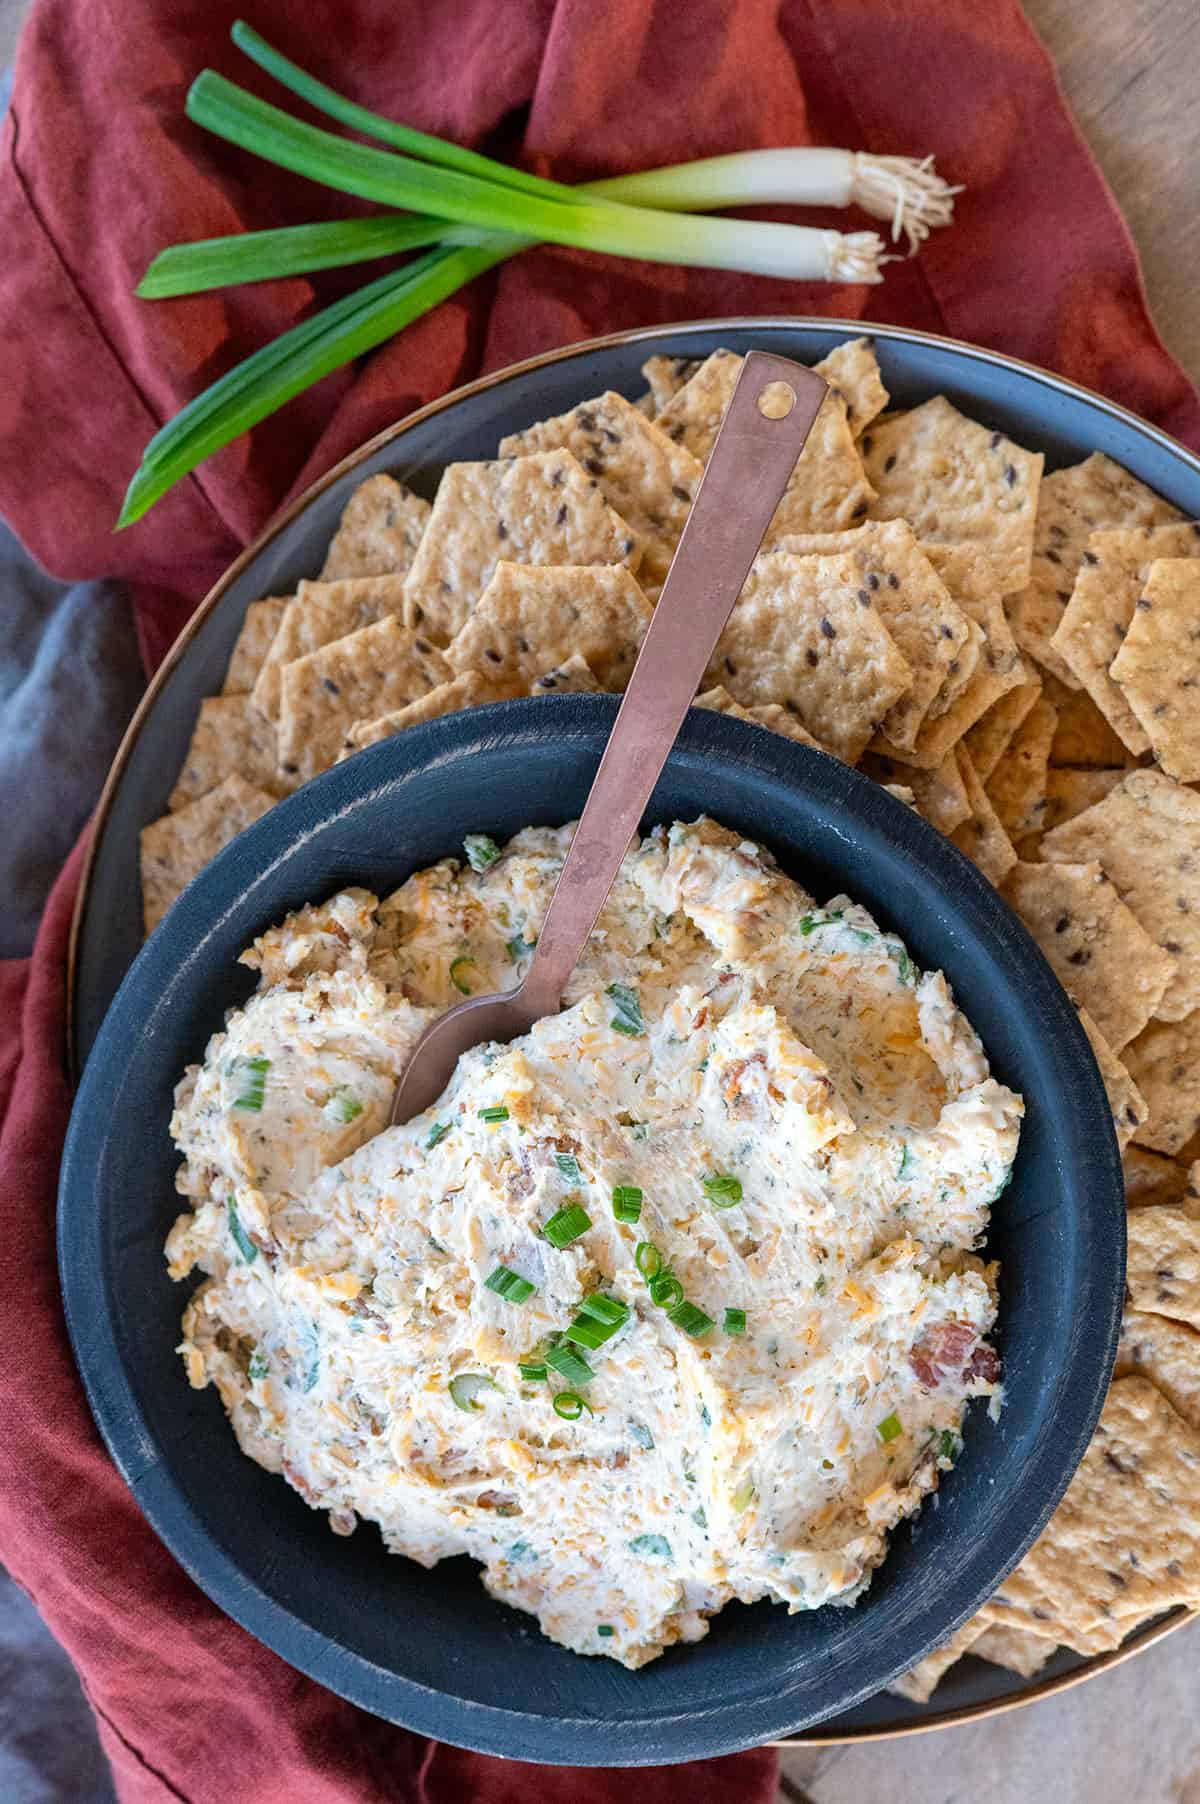 Smoked cream cheese crack dip in black bowl with spoon.